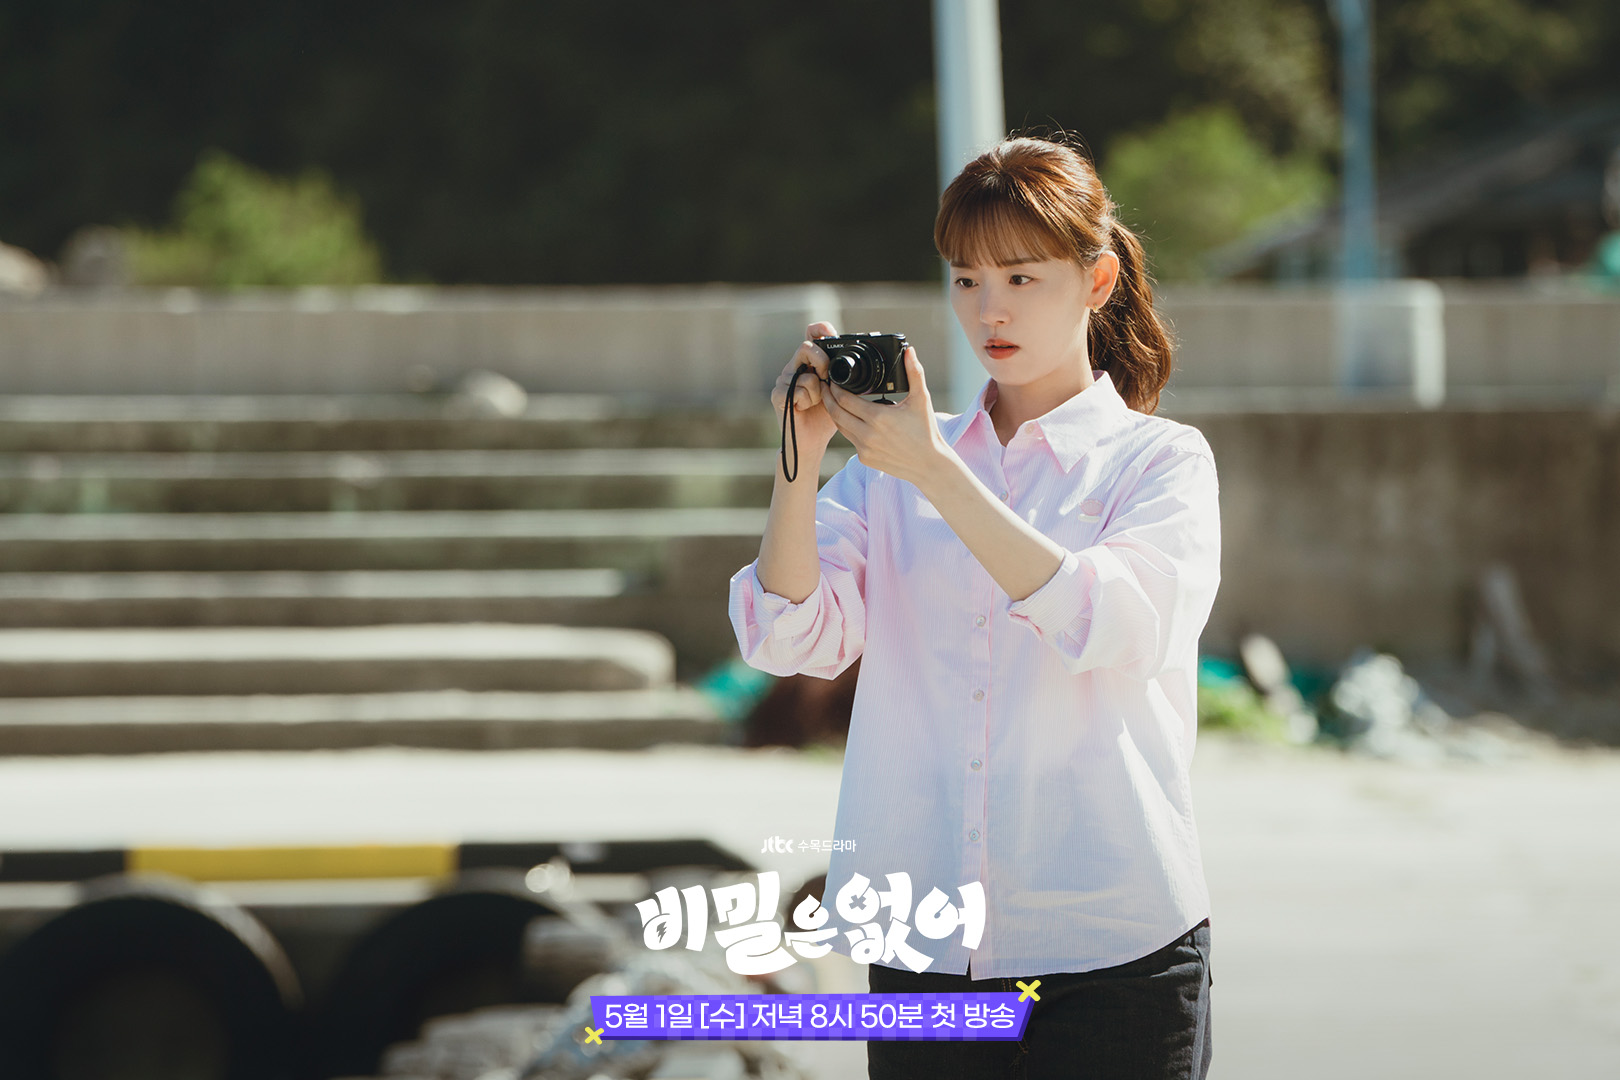 Kang Han Na Transforms Into A Passionate And Bubbly Variety Show Writer In 